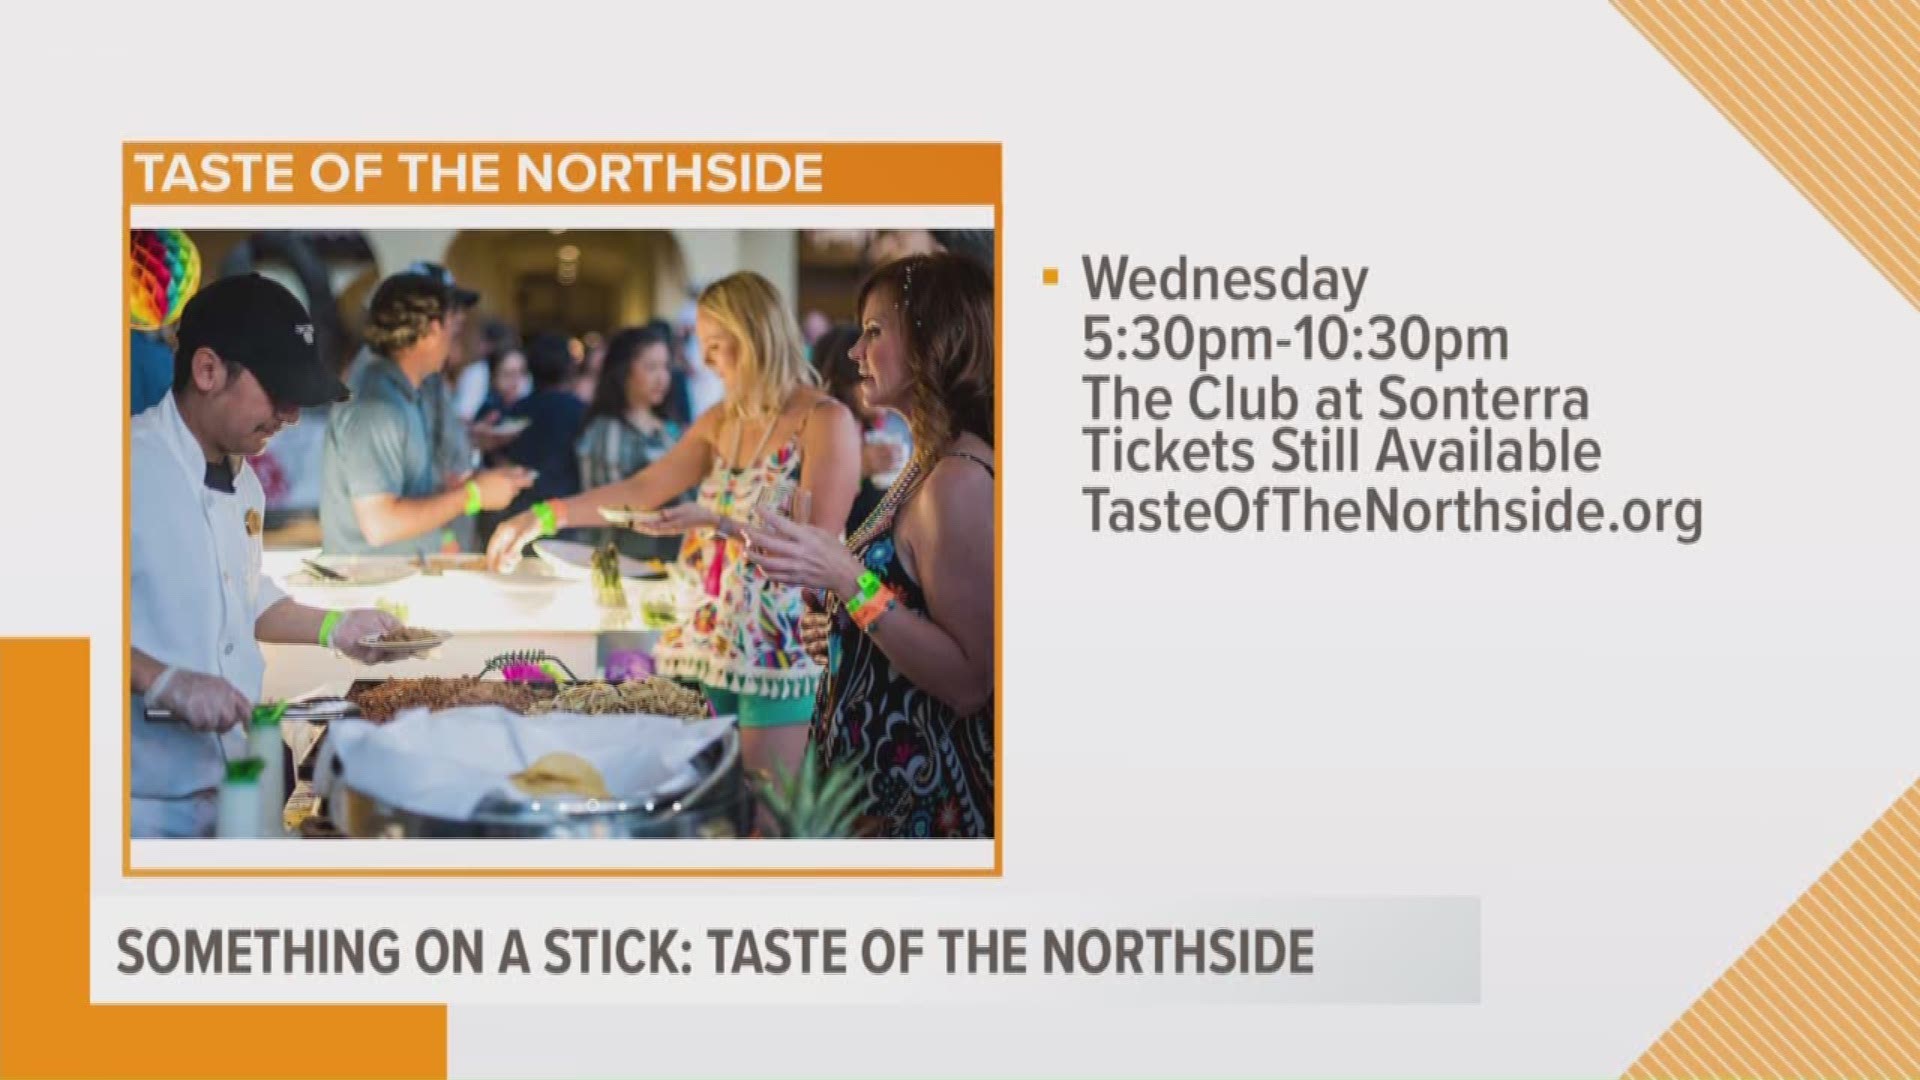 Viva Fiesta! On this Monday of the ten day Fiesta celebration, we're bringing you "something on a stick" from Taste of the Northside.